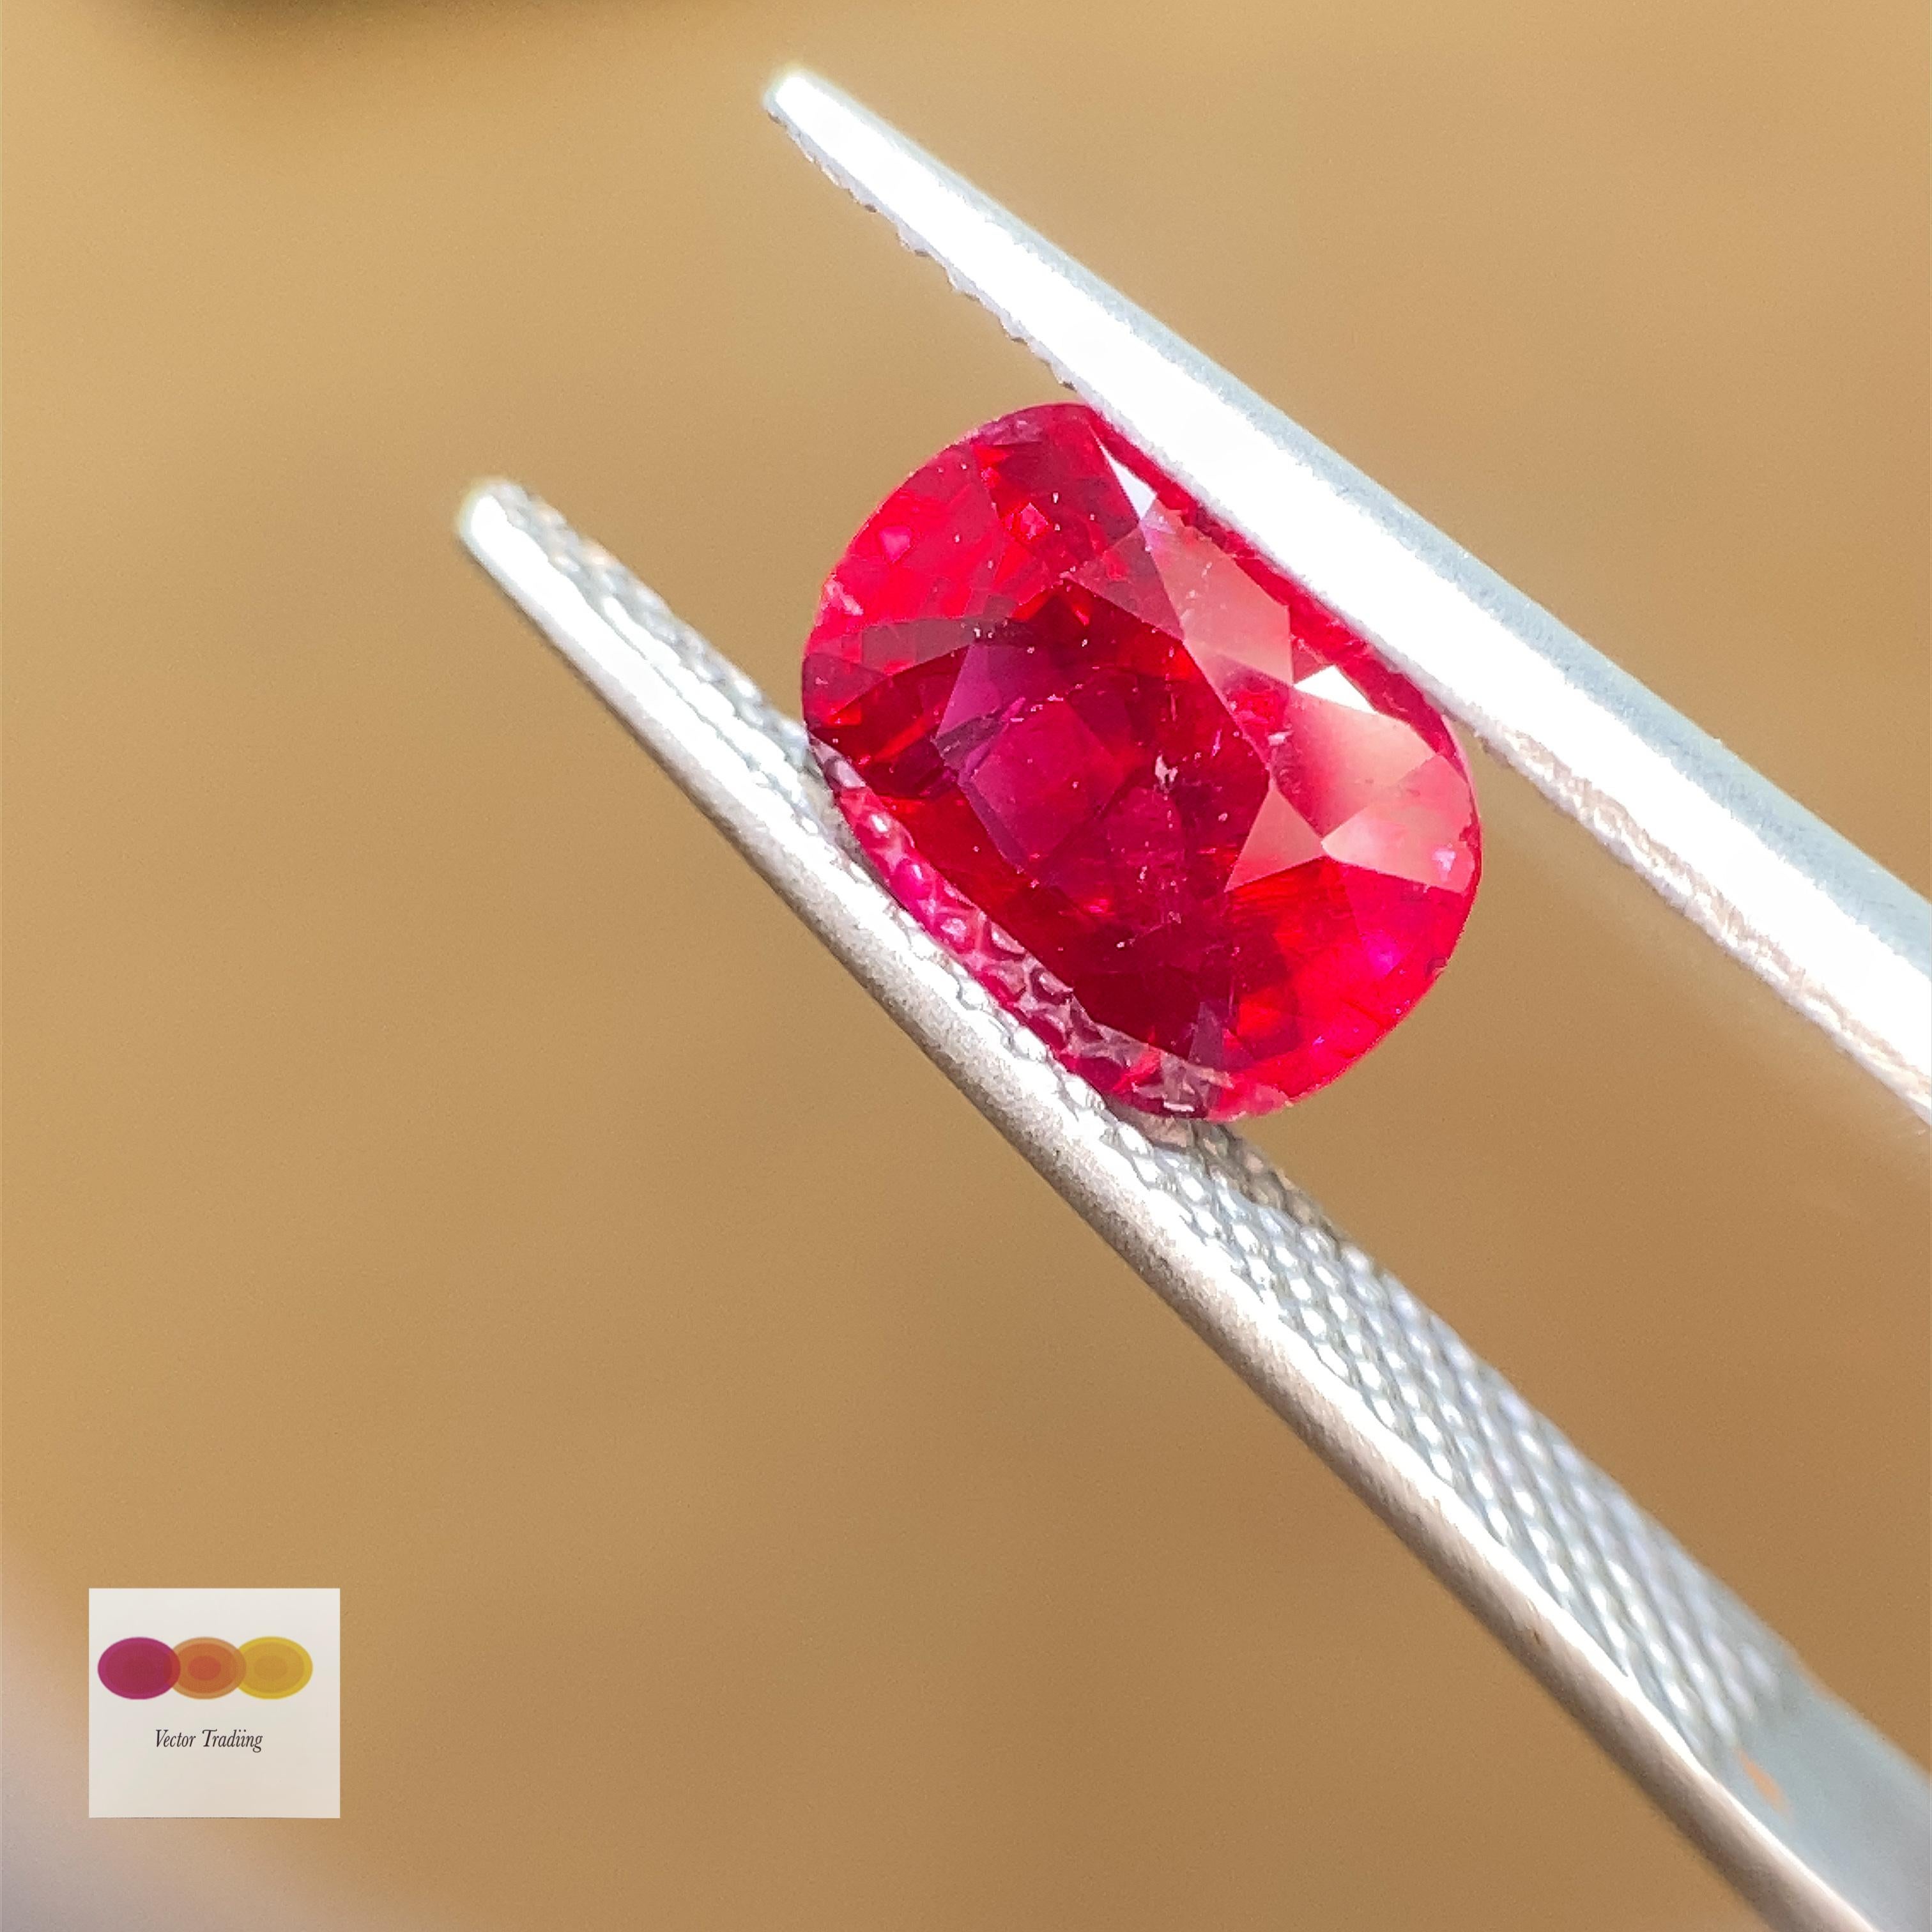 1.81 Carat GIA Certified Natural Burma No Heat Cushion-Cut Pigeon's Blood Red Ruby:

A rare gem, it is a natural cushion-cut Burmese natural unheated vivid red ruby weighing a 1.81 carat. The ruby, certified by GIA Lab, hails from the historic ruby